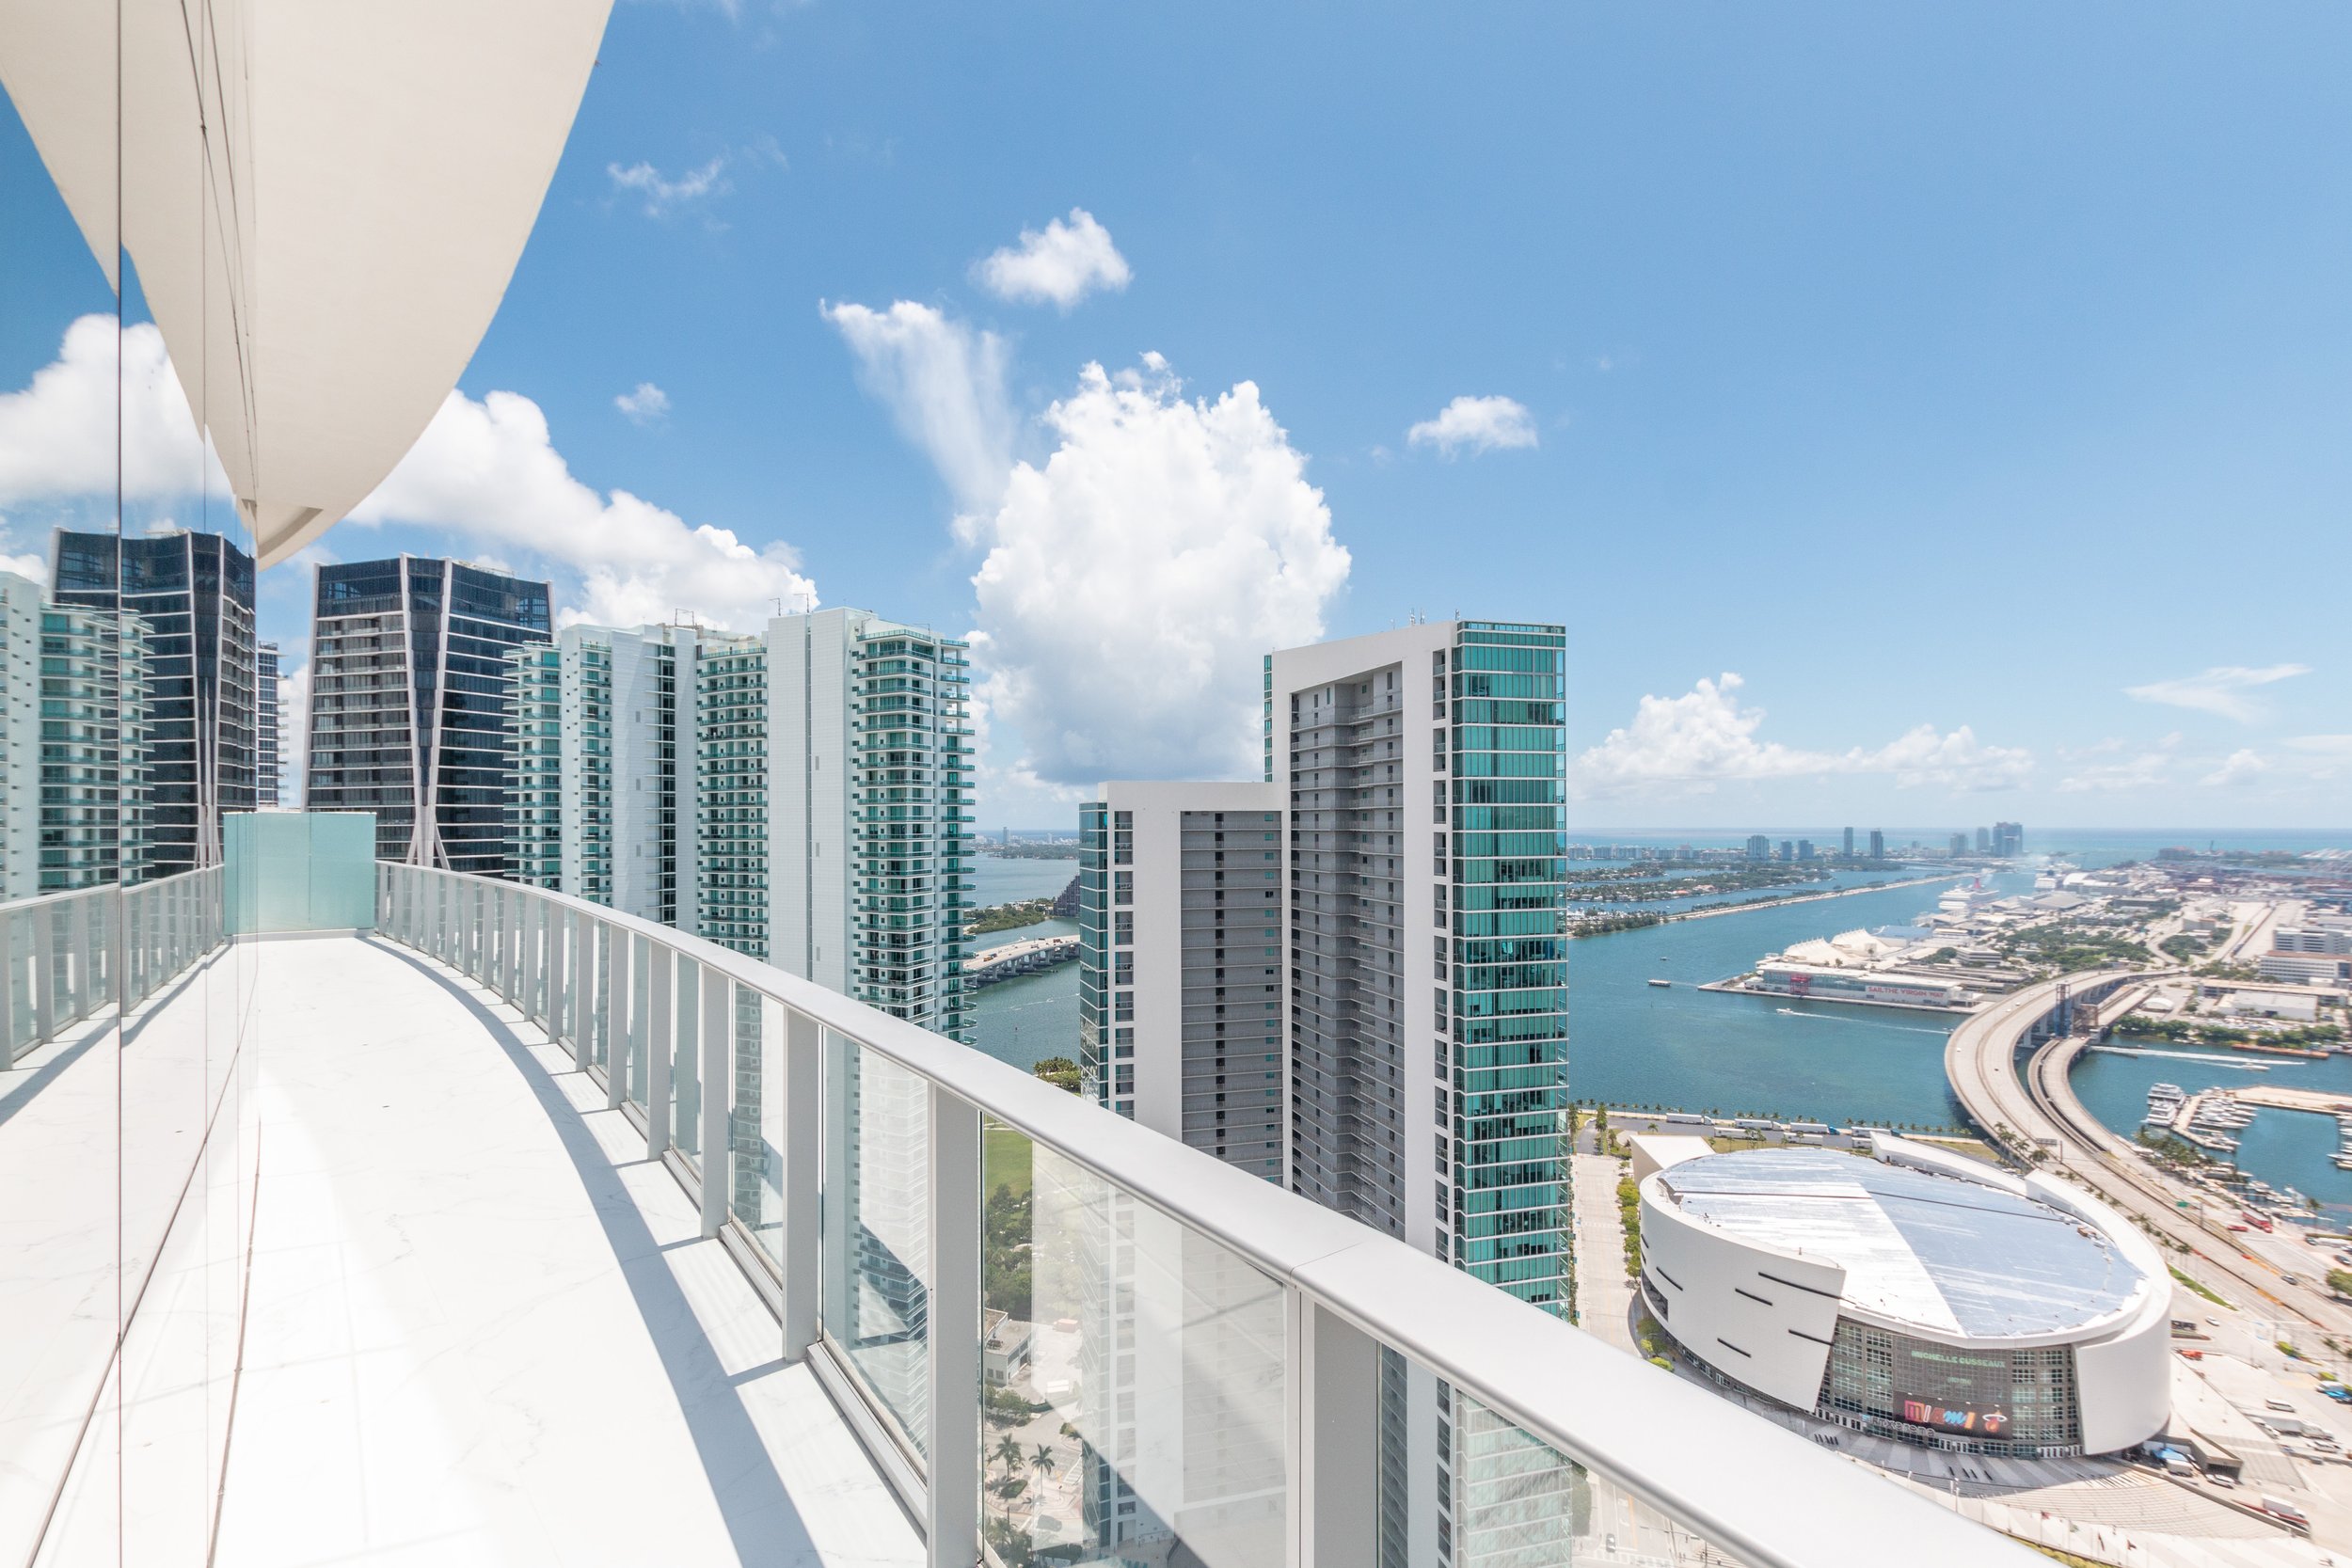 Step Inside A Sky-High Ultra-Luxe Penthouse At PARAMOUNT Miami Worldcenter For Rent Asking $40K Per Month ALTARA Properties Scott Lawrence Porter 1.37.jpg